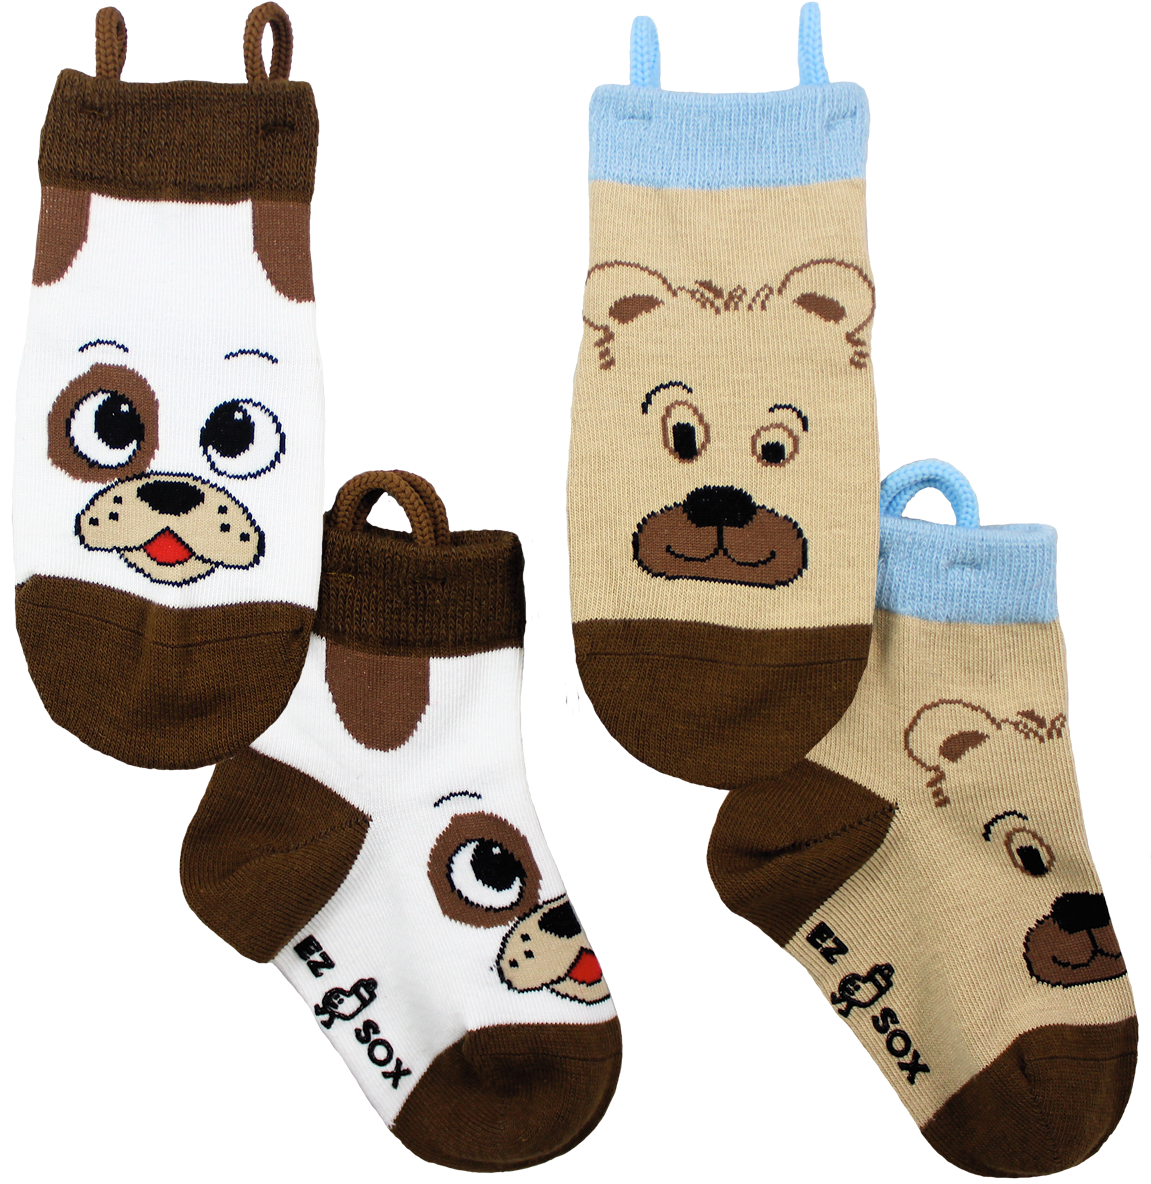 A Group Of Socks With Bears On Them